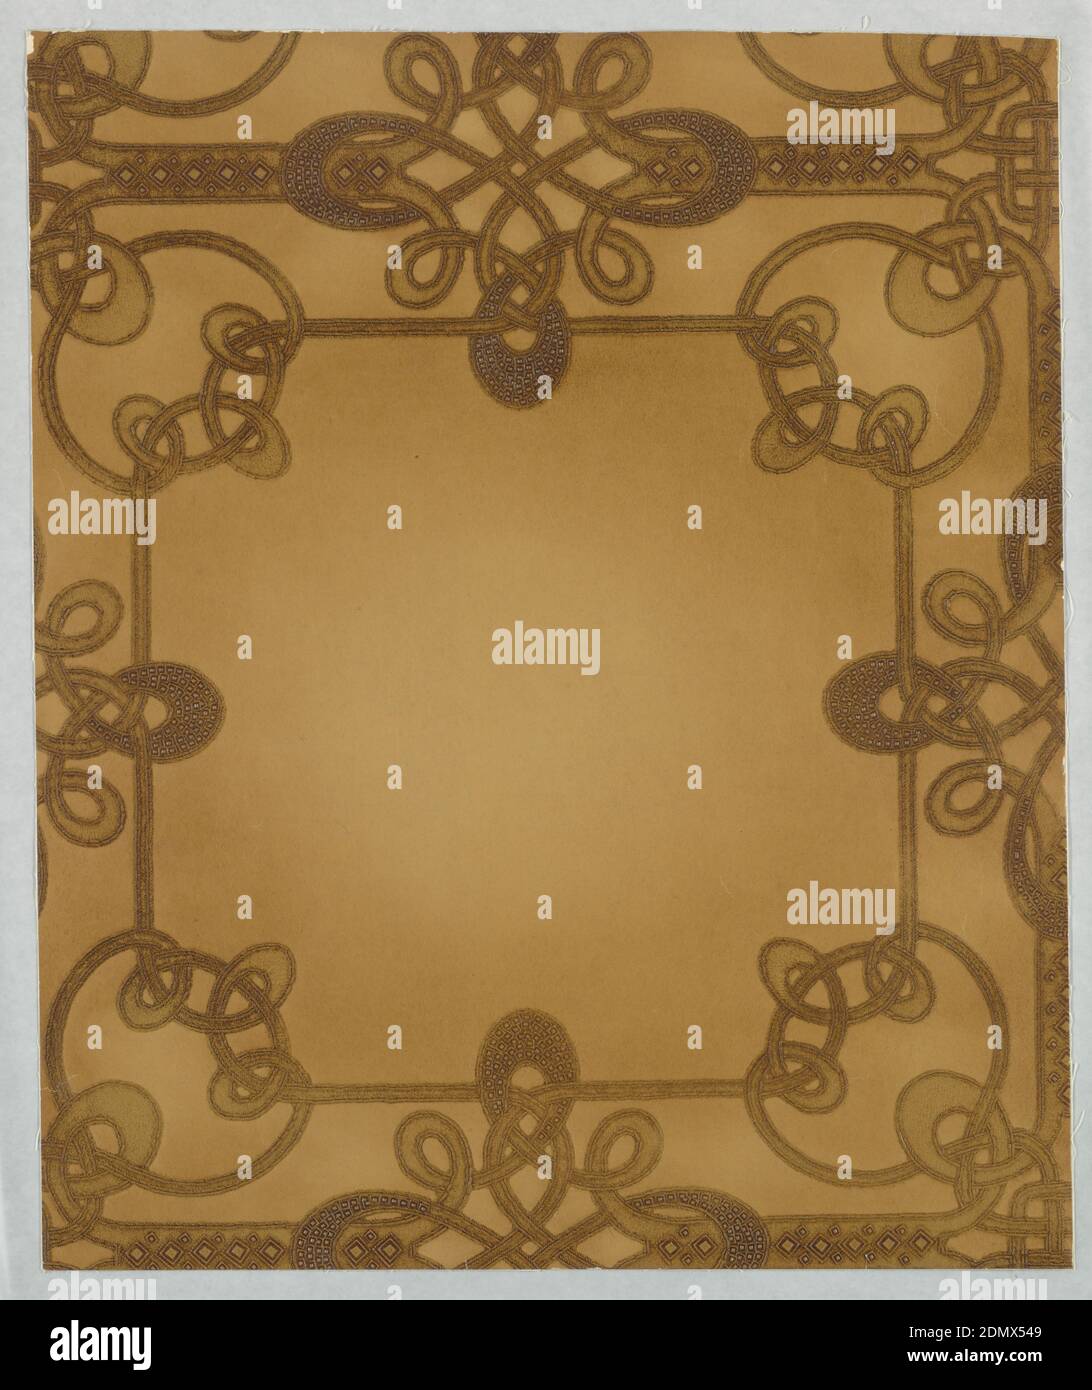 Sidewall, Block-printed paper, embossed, hand-rubbed oil finish, Imitation leather. Geometric design of interlacing strap work studded bands in both curves and straight lines around a large voided central panel. Field is plain. Entire design is embossed and is antiqued by hand., USA, 1920, Wallcoverings, Sidewall Stock Photo